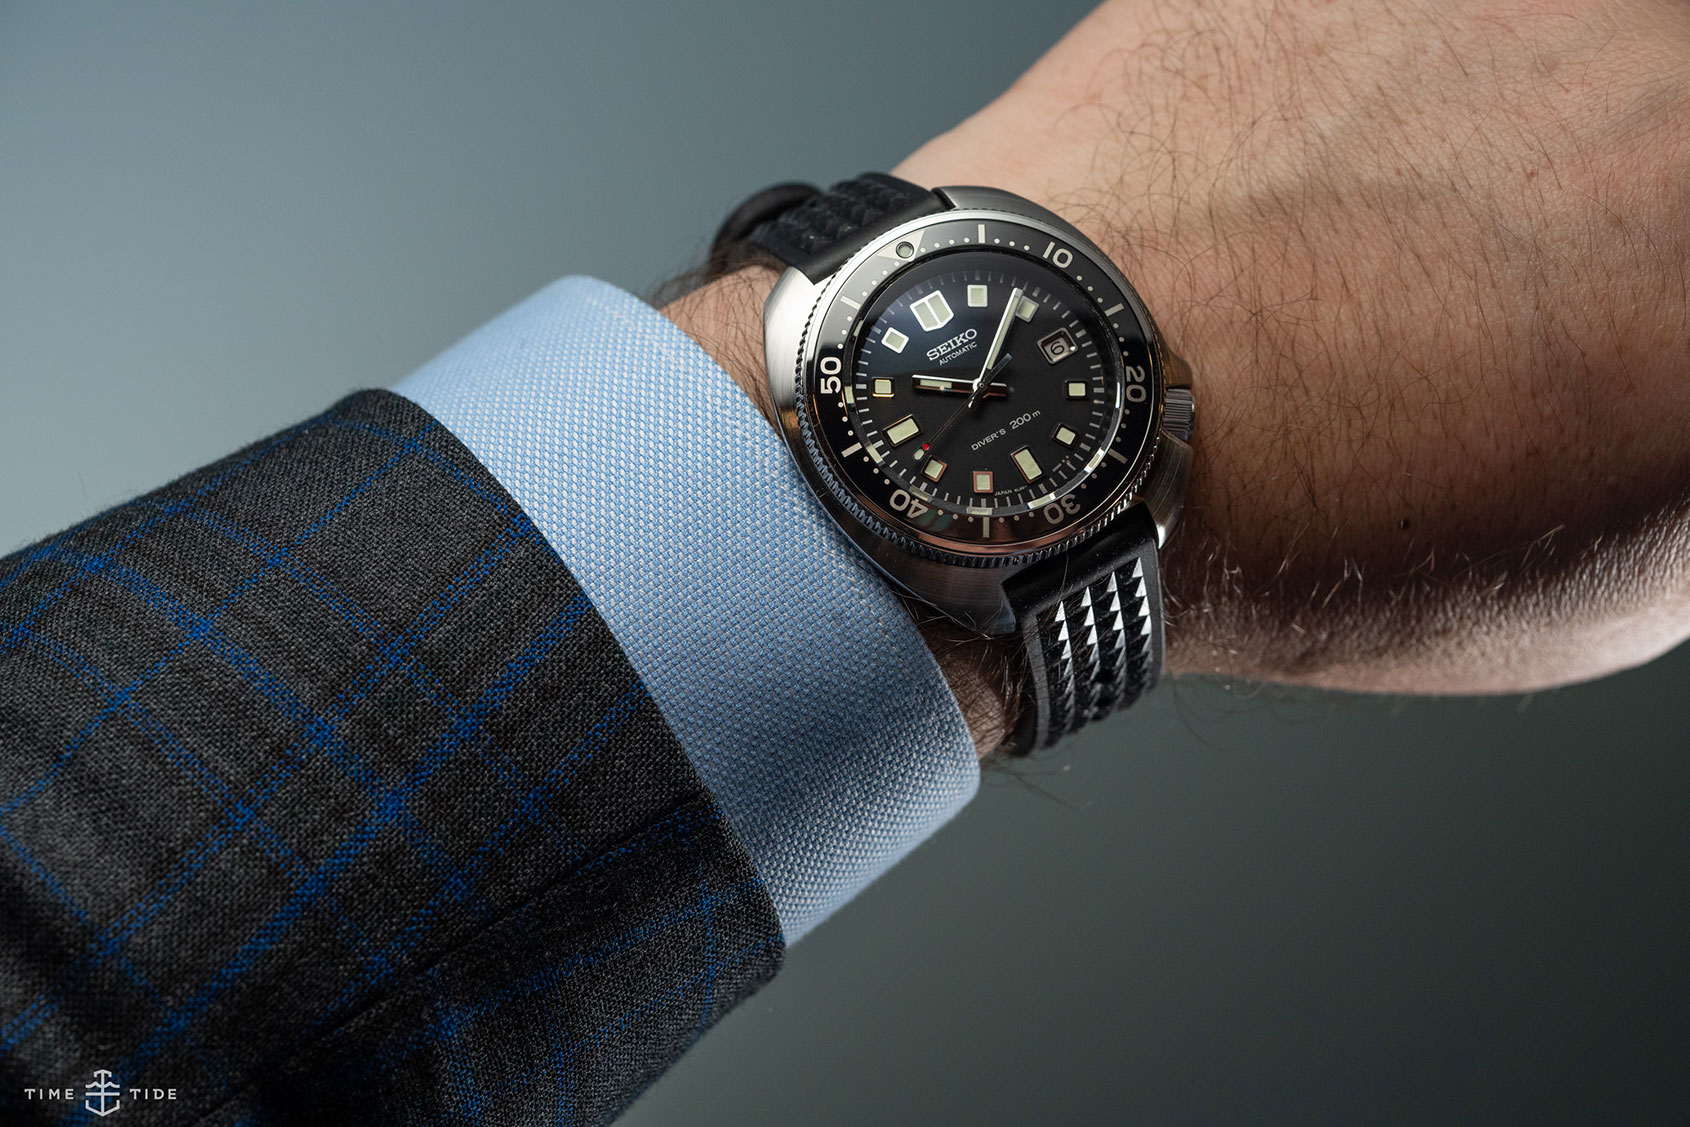 HANDS-ON: The Seiko Diver’s Re-creation Limited Edition SLA033